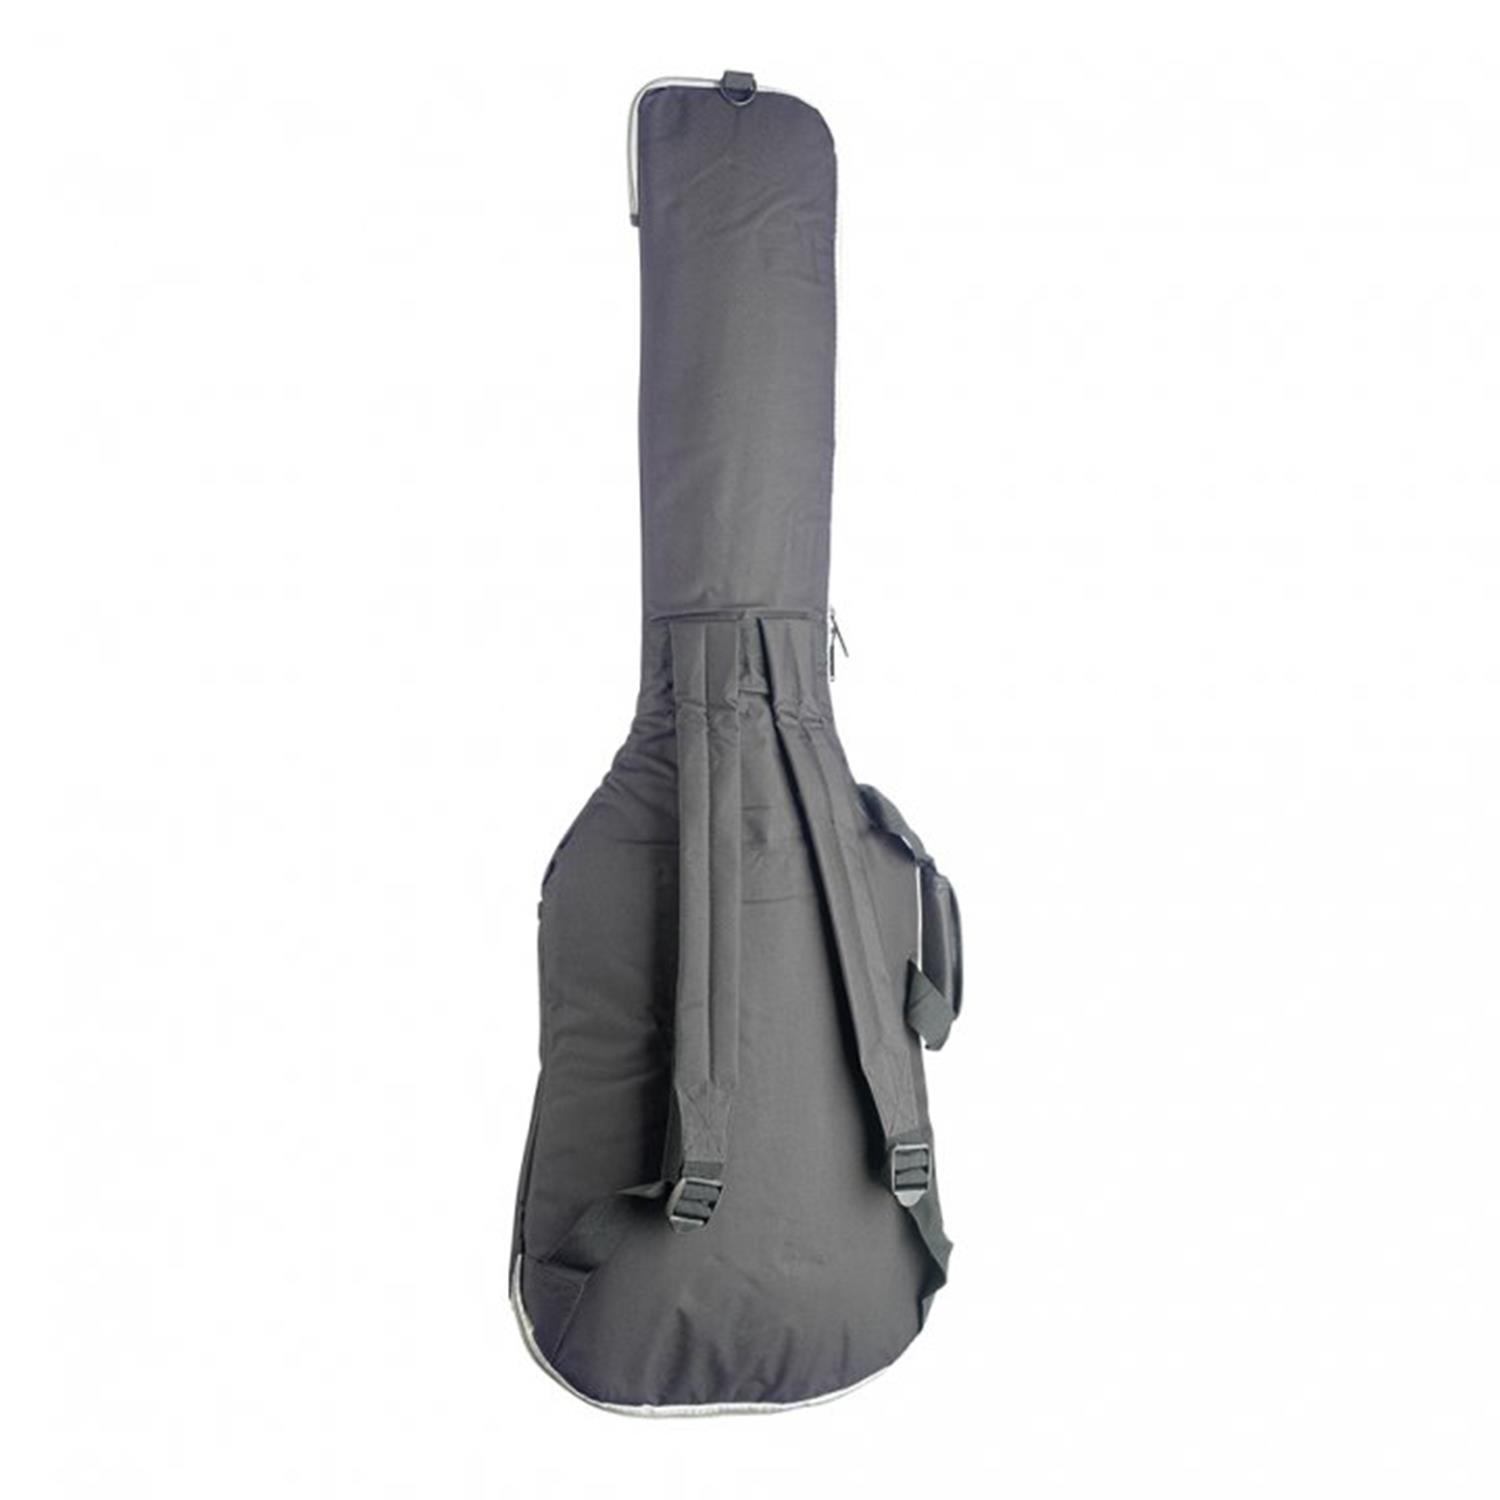 Stagg STB-10 UE Padded Bag for Electric Guitar - DY Pro Audio